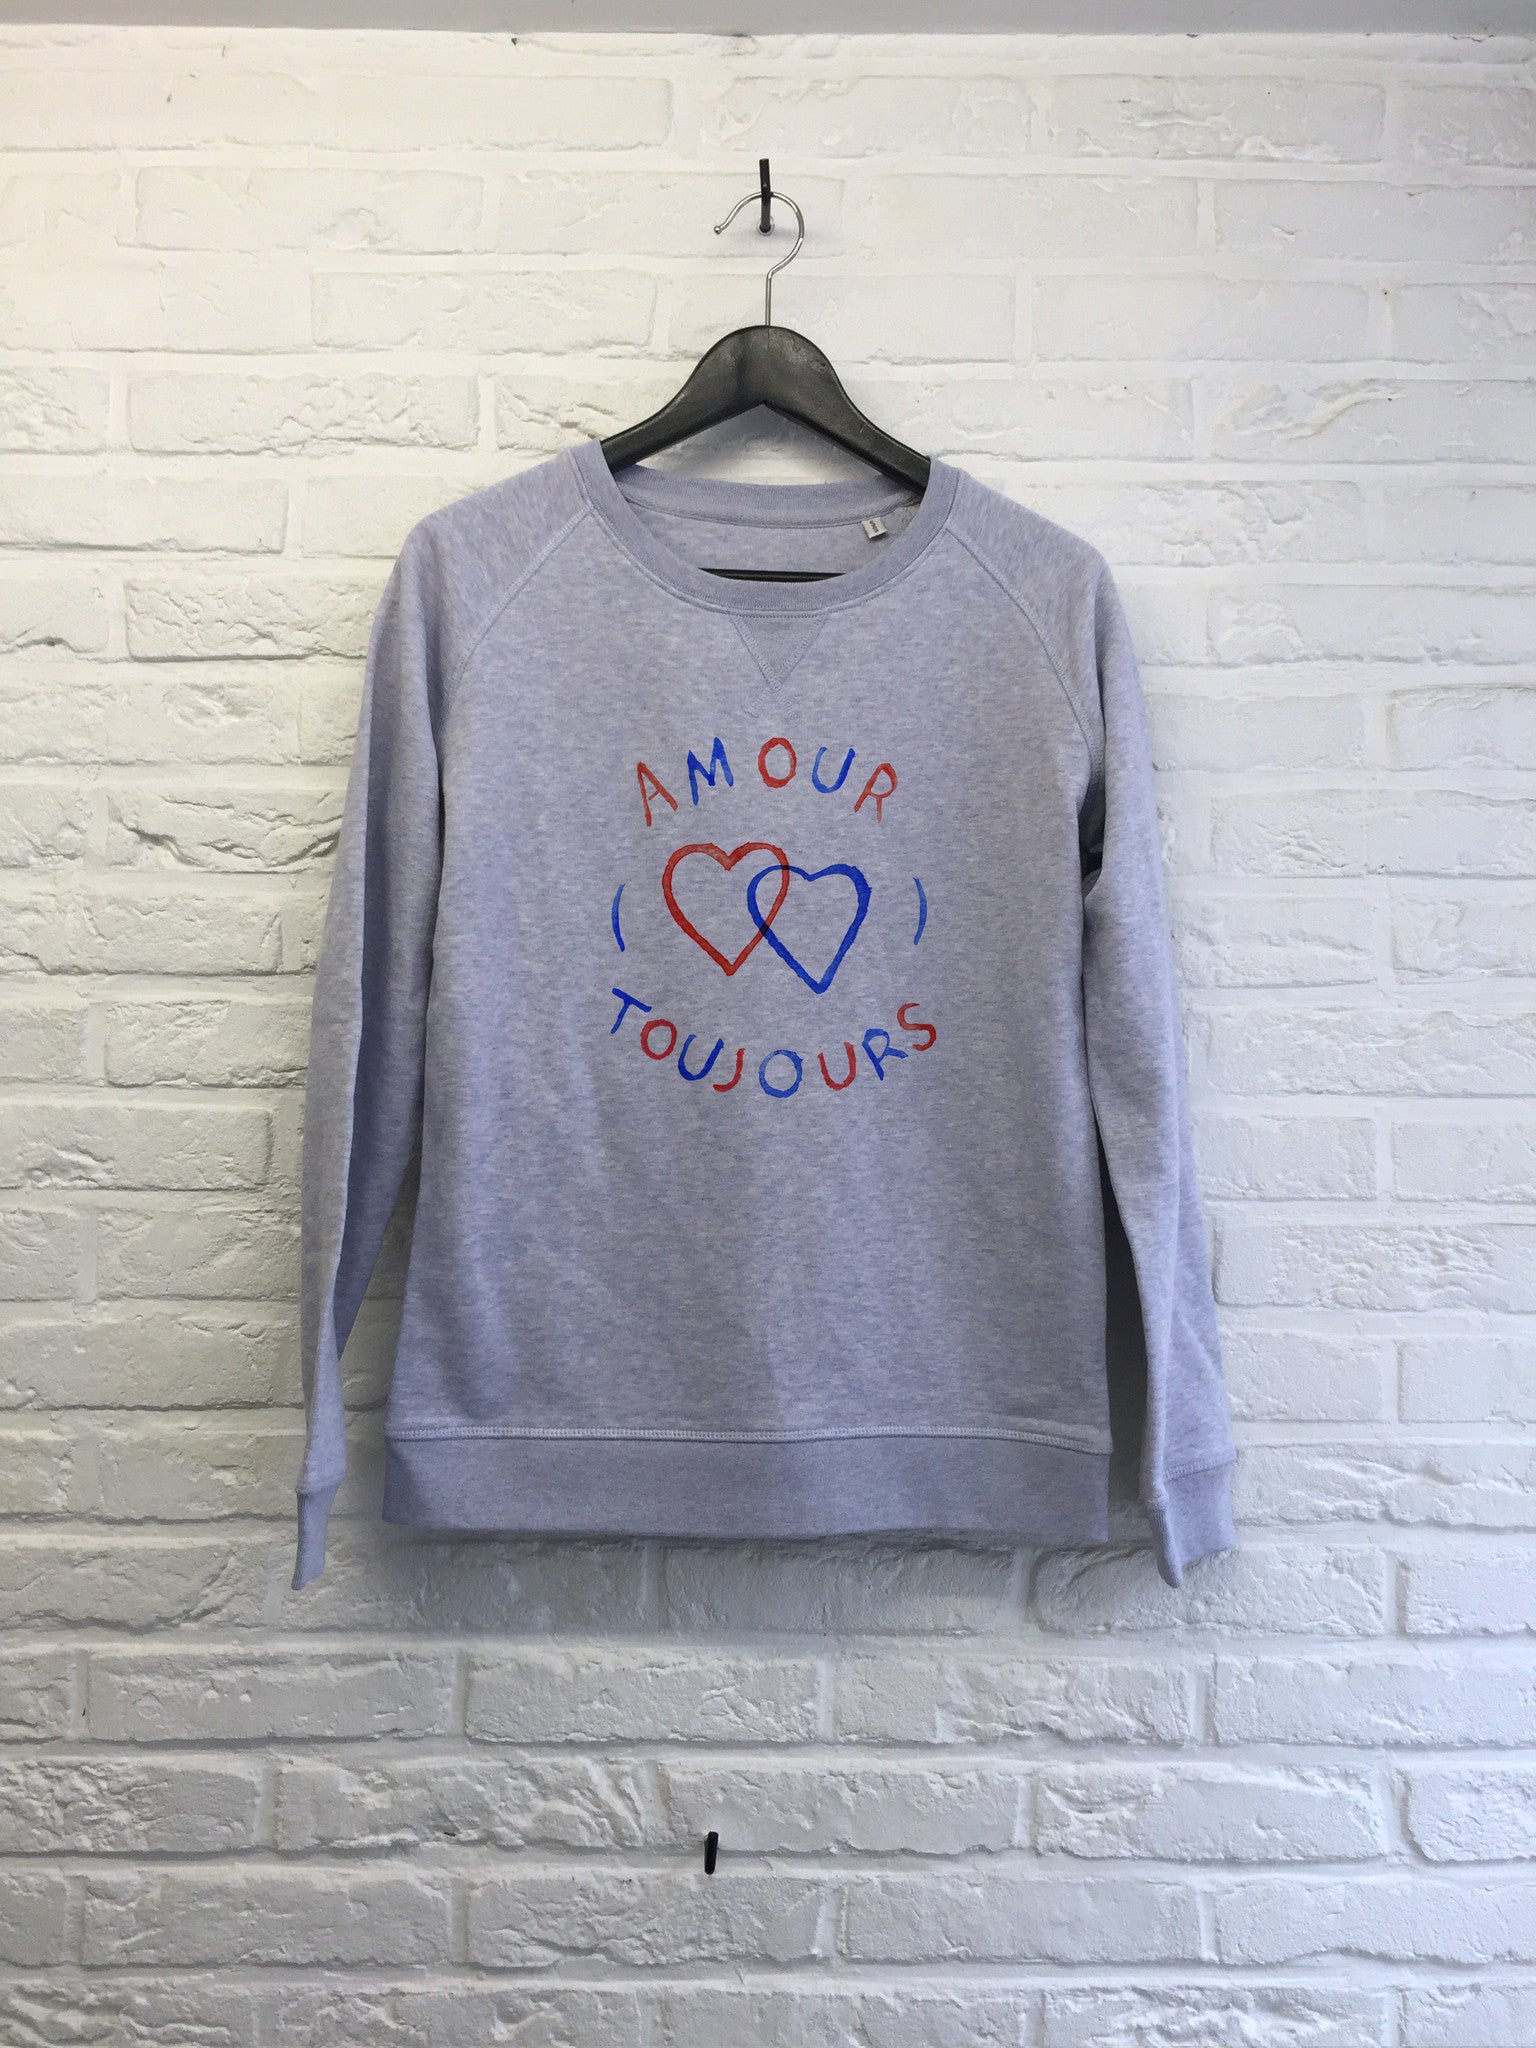 TH Gallery - Amour Toujours - Sweat - Femme-Sweat shirts-Atelier Amelot